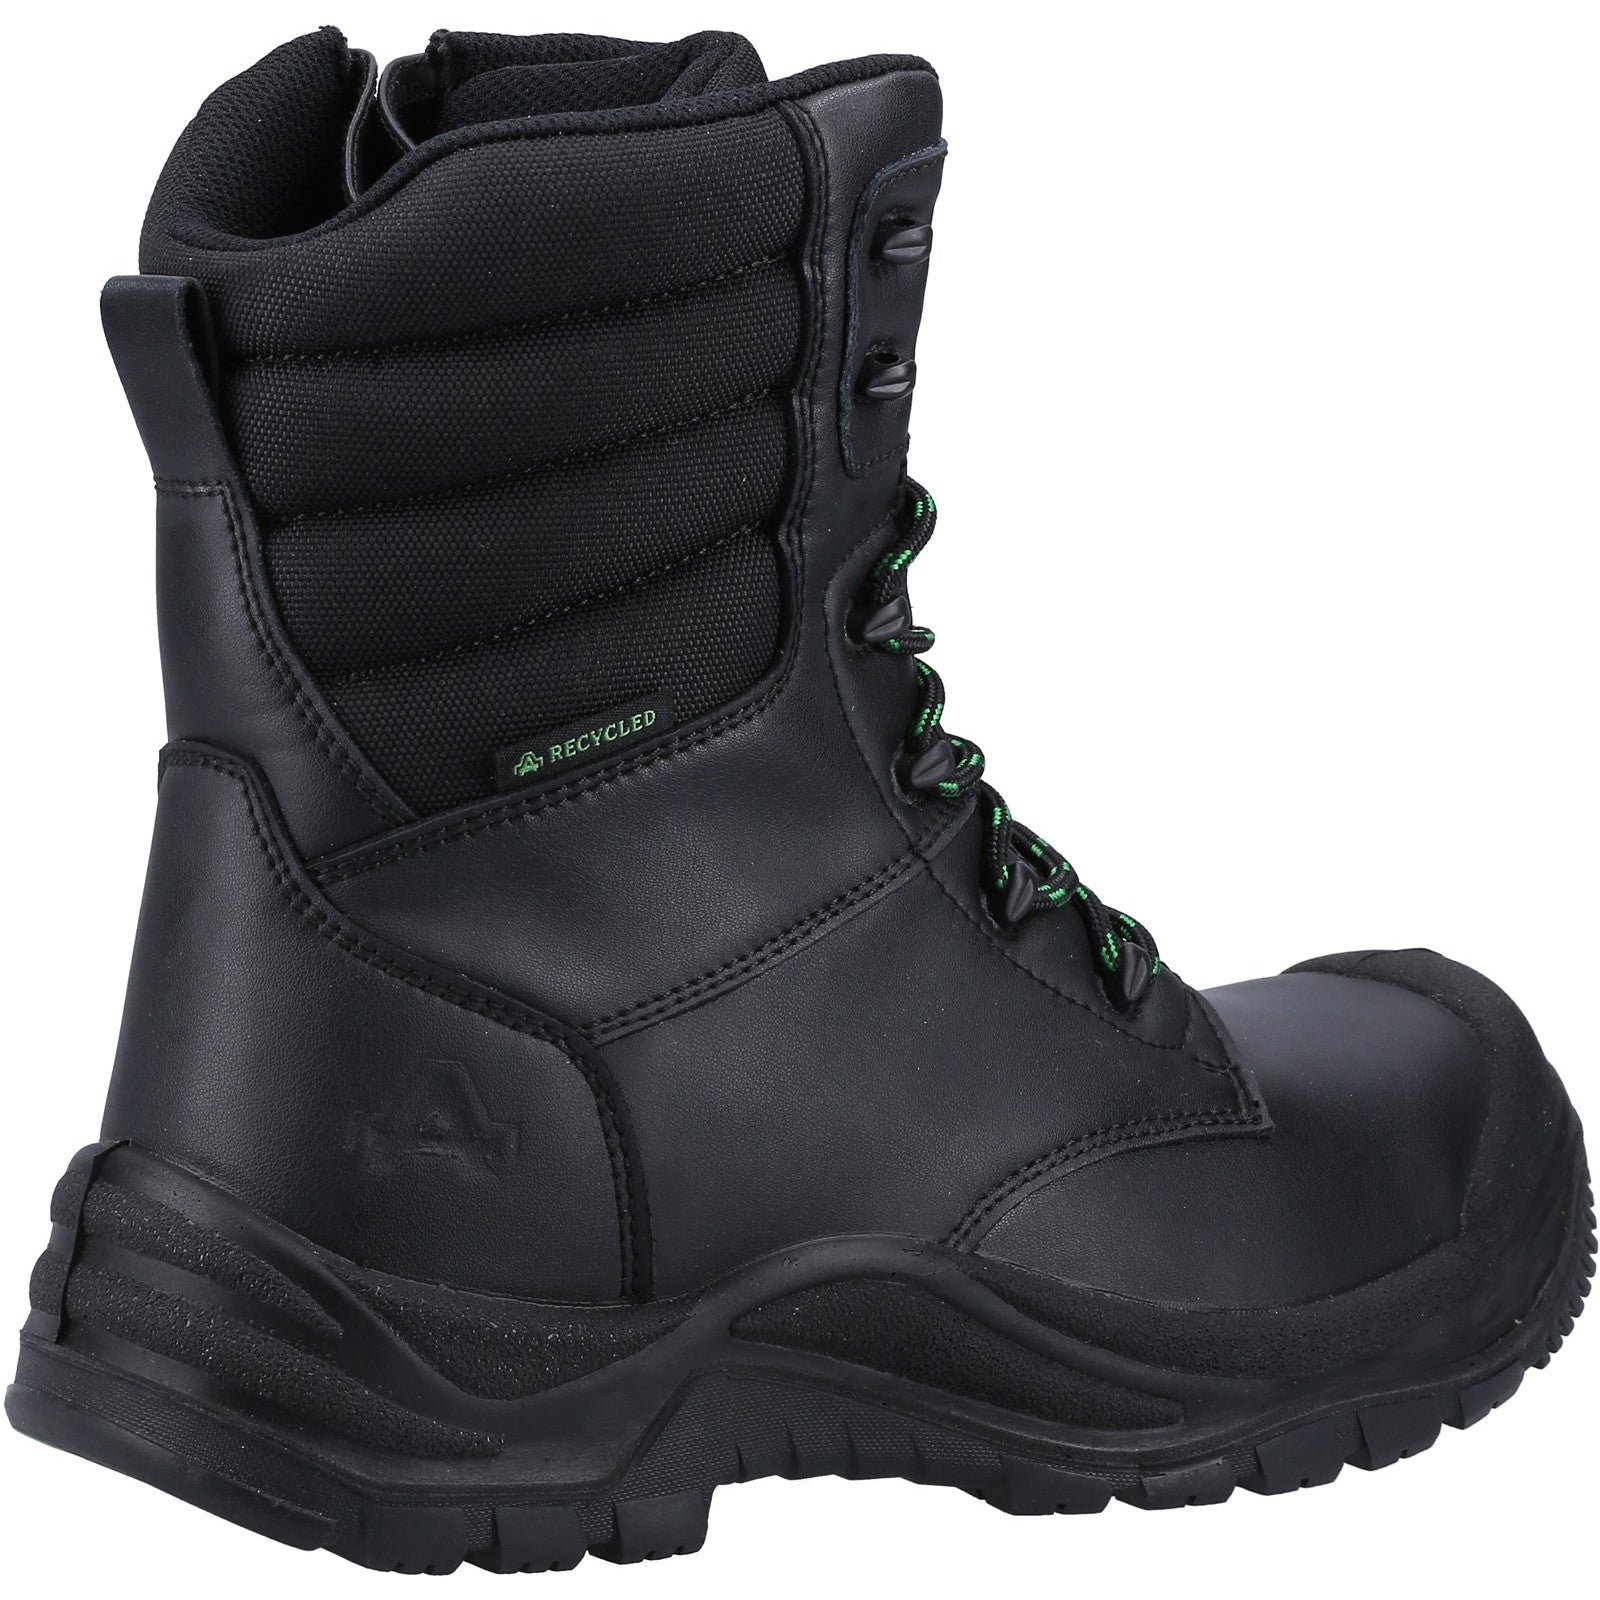 Amblers 503 Safety Boots